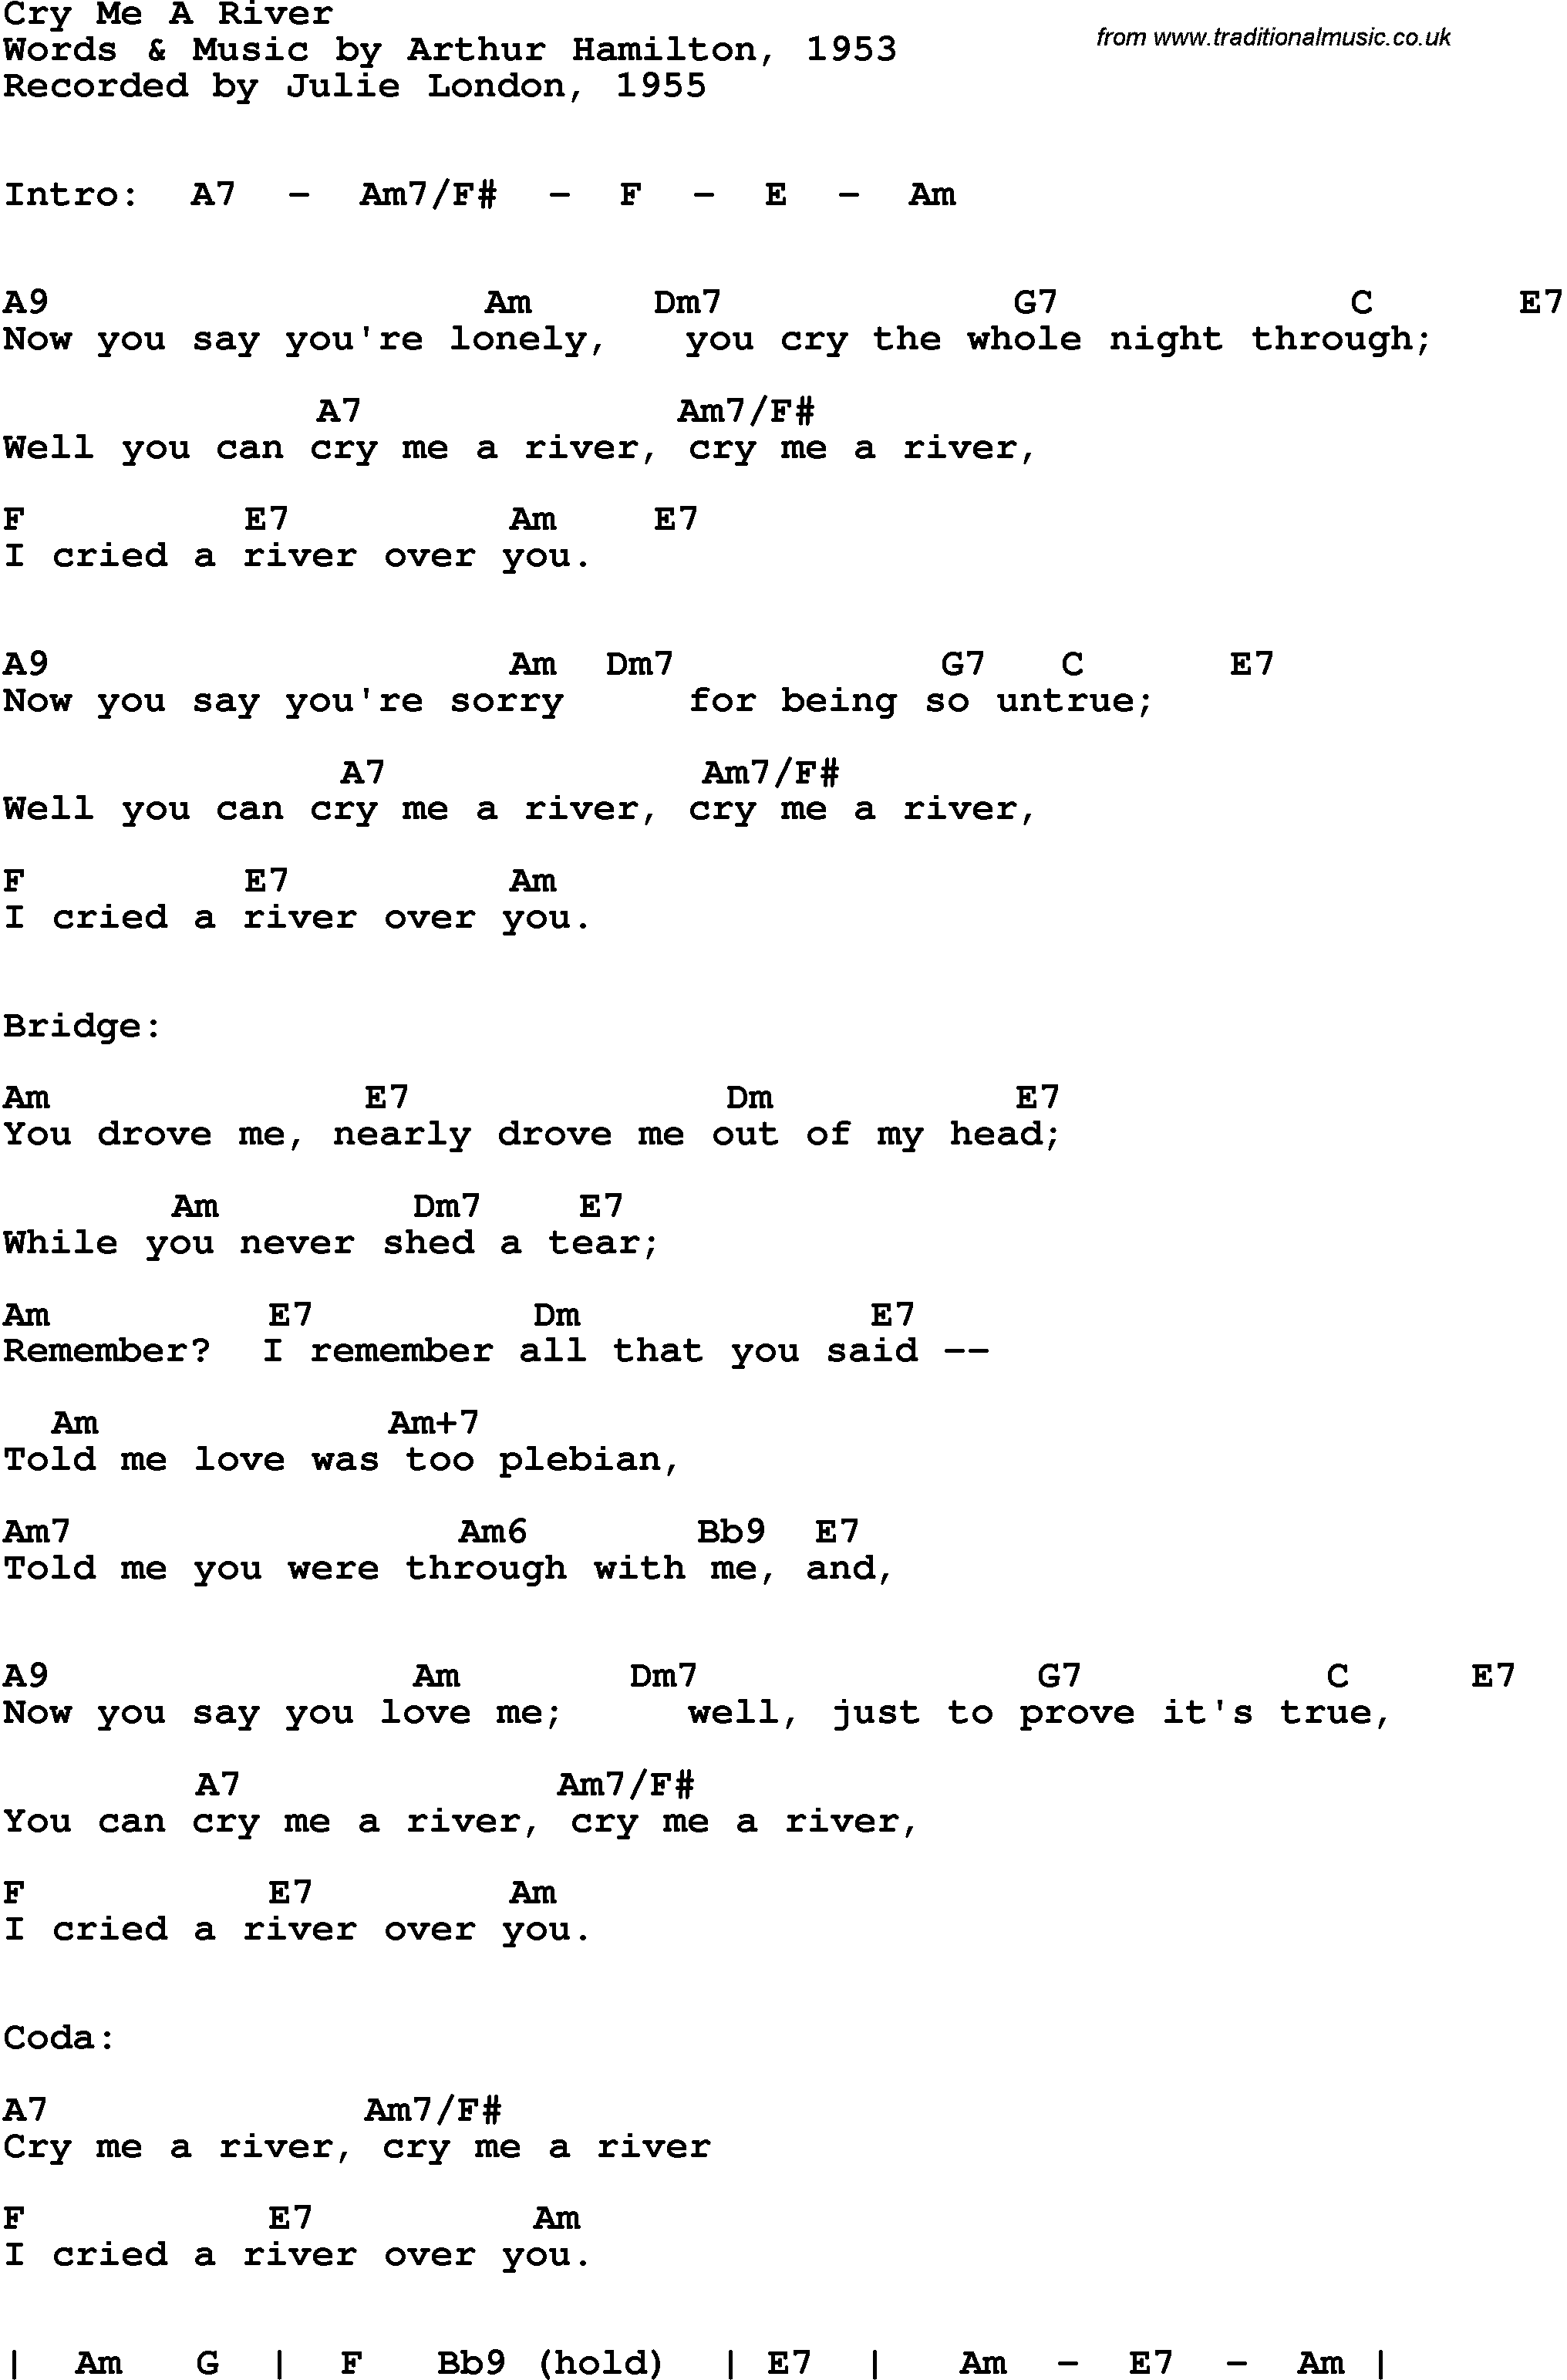 Song Lyrics with guitar chords for Cry Me A River - Julie London, 1955